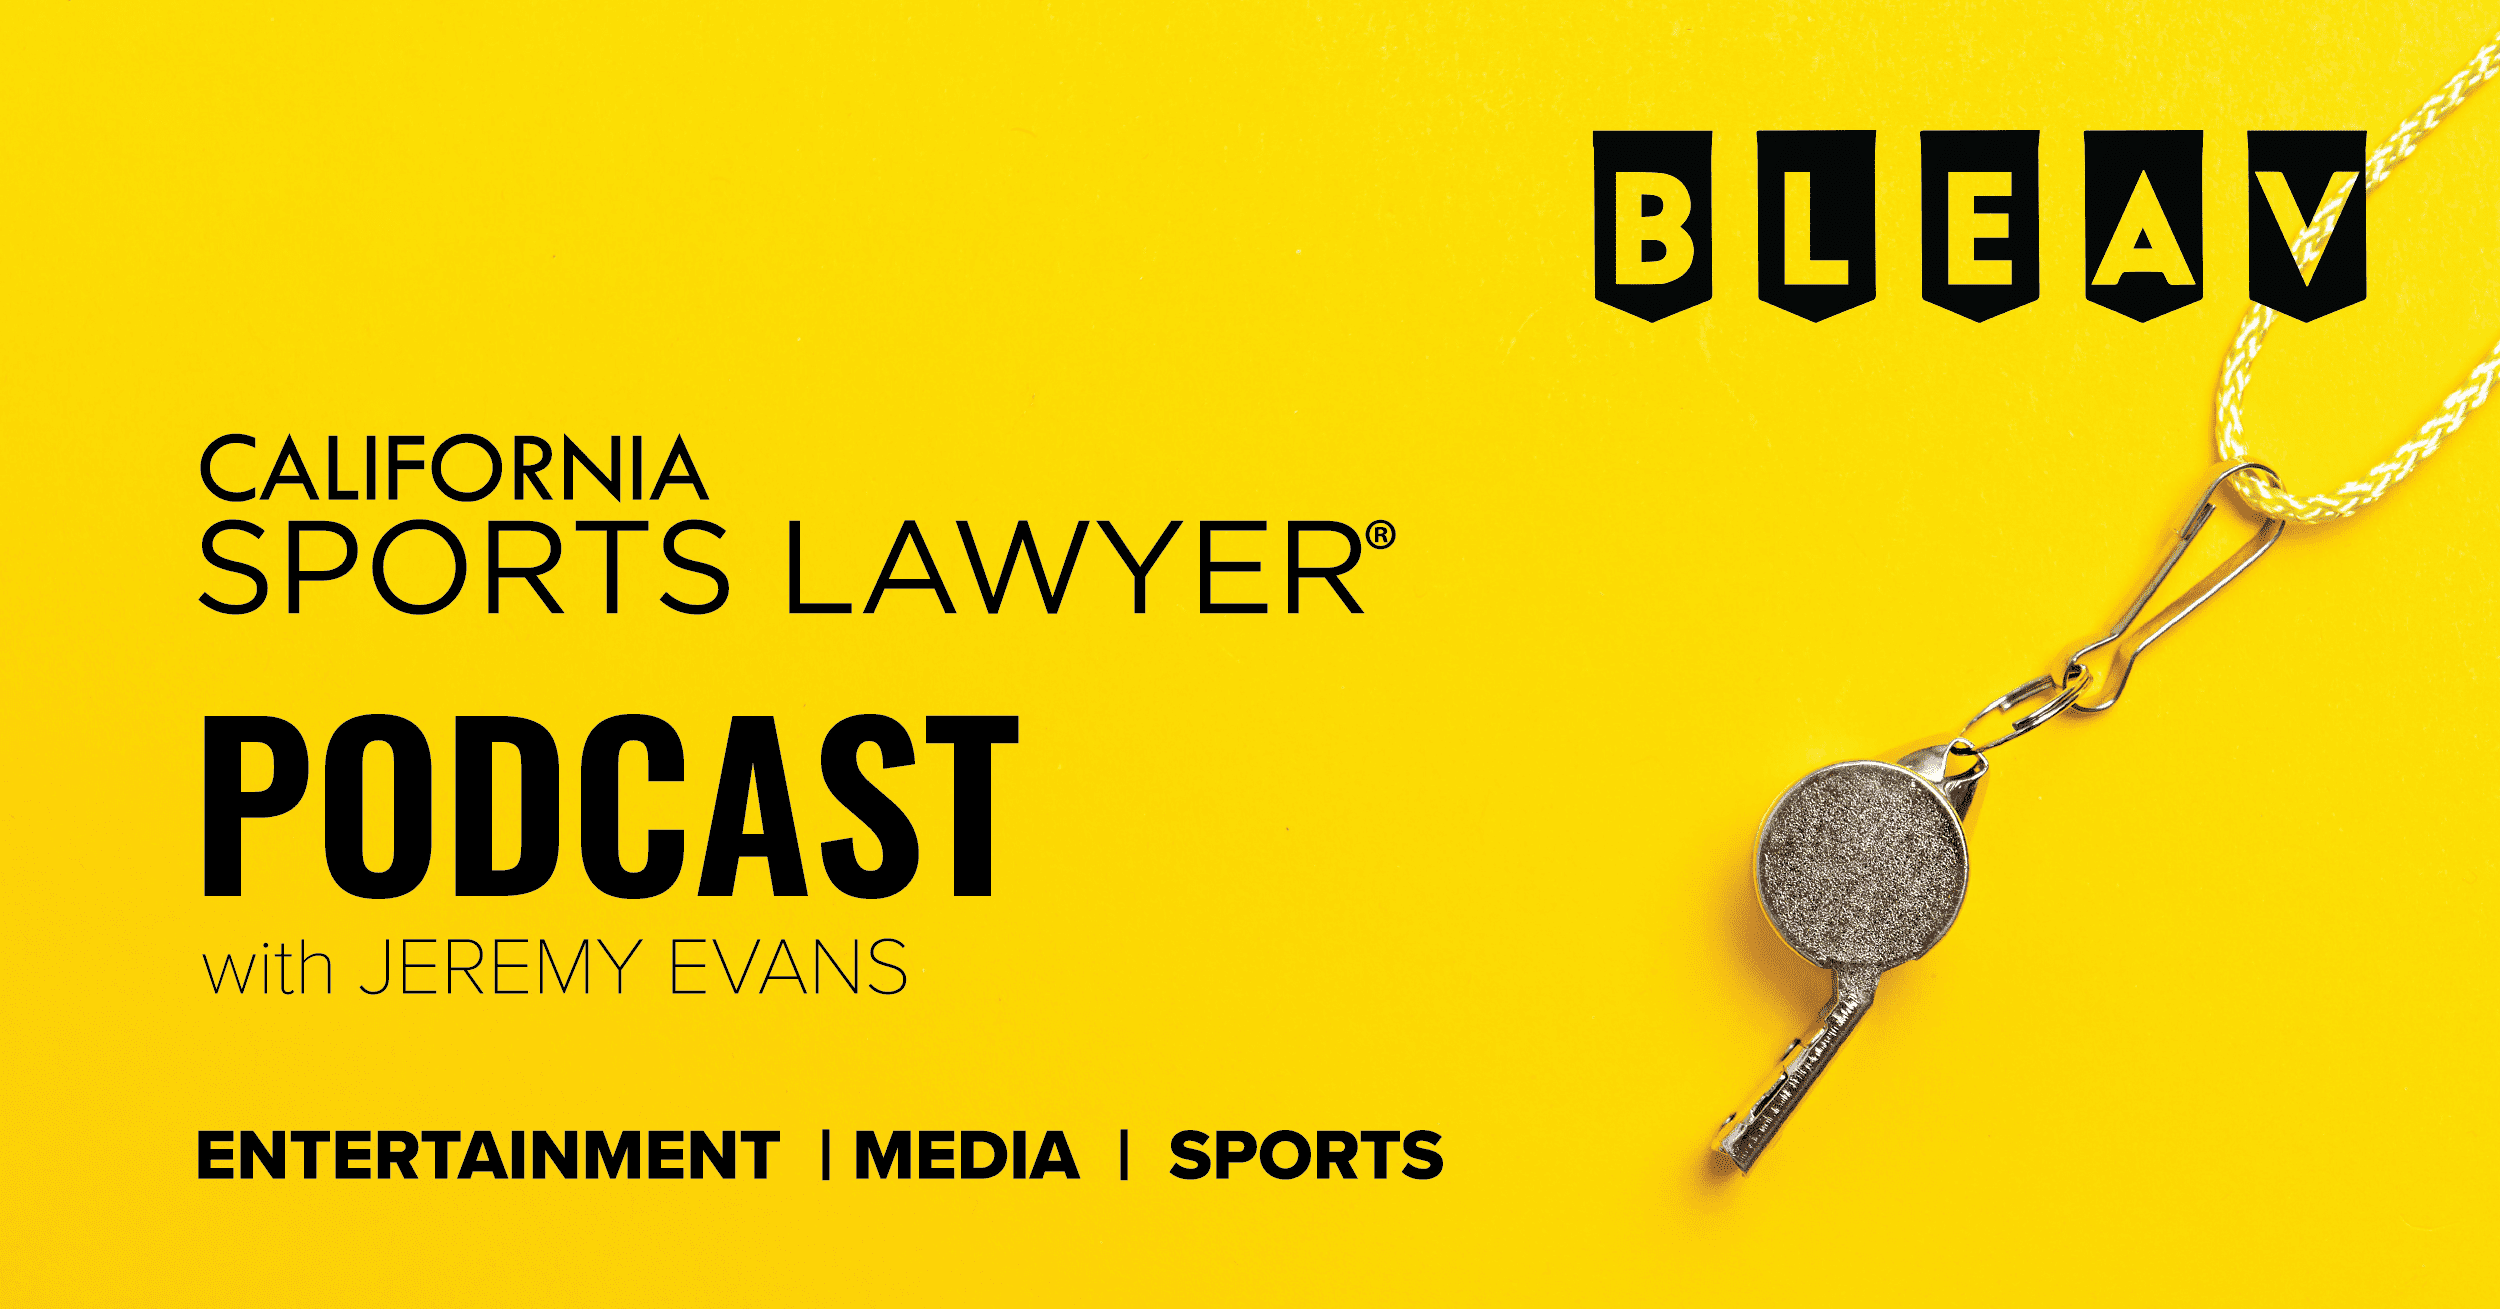 California Sports Lawyer® Podcast with Jeremy Evans: The Contract that Broke the Internet